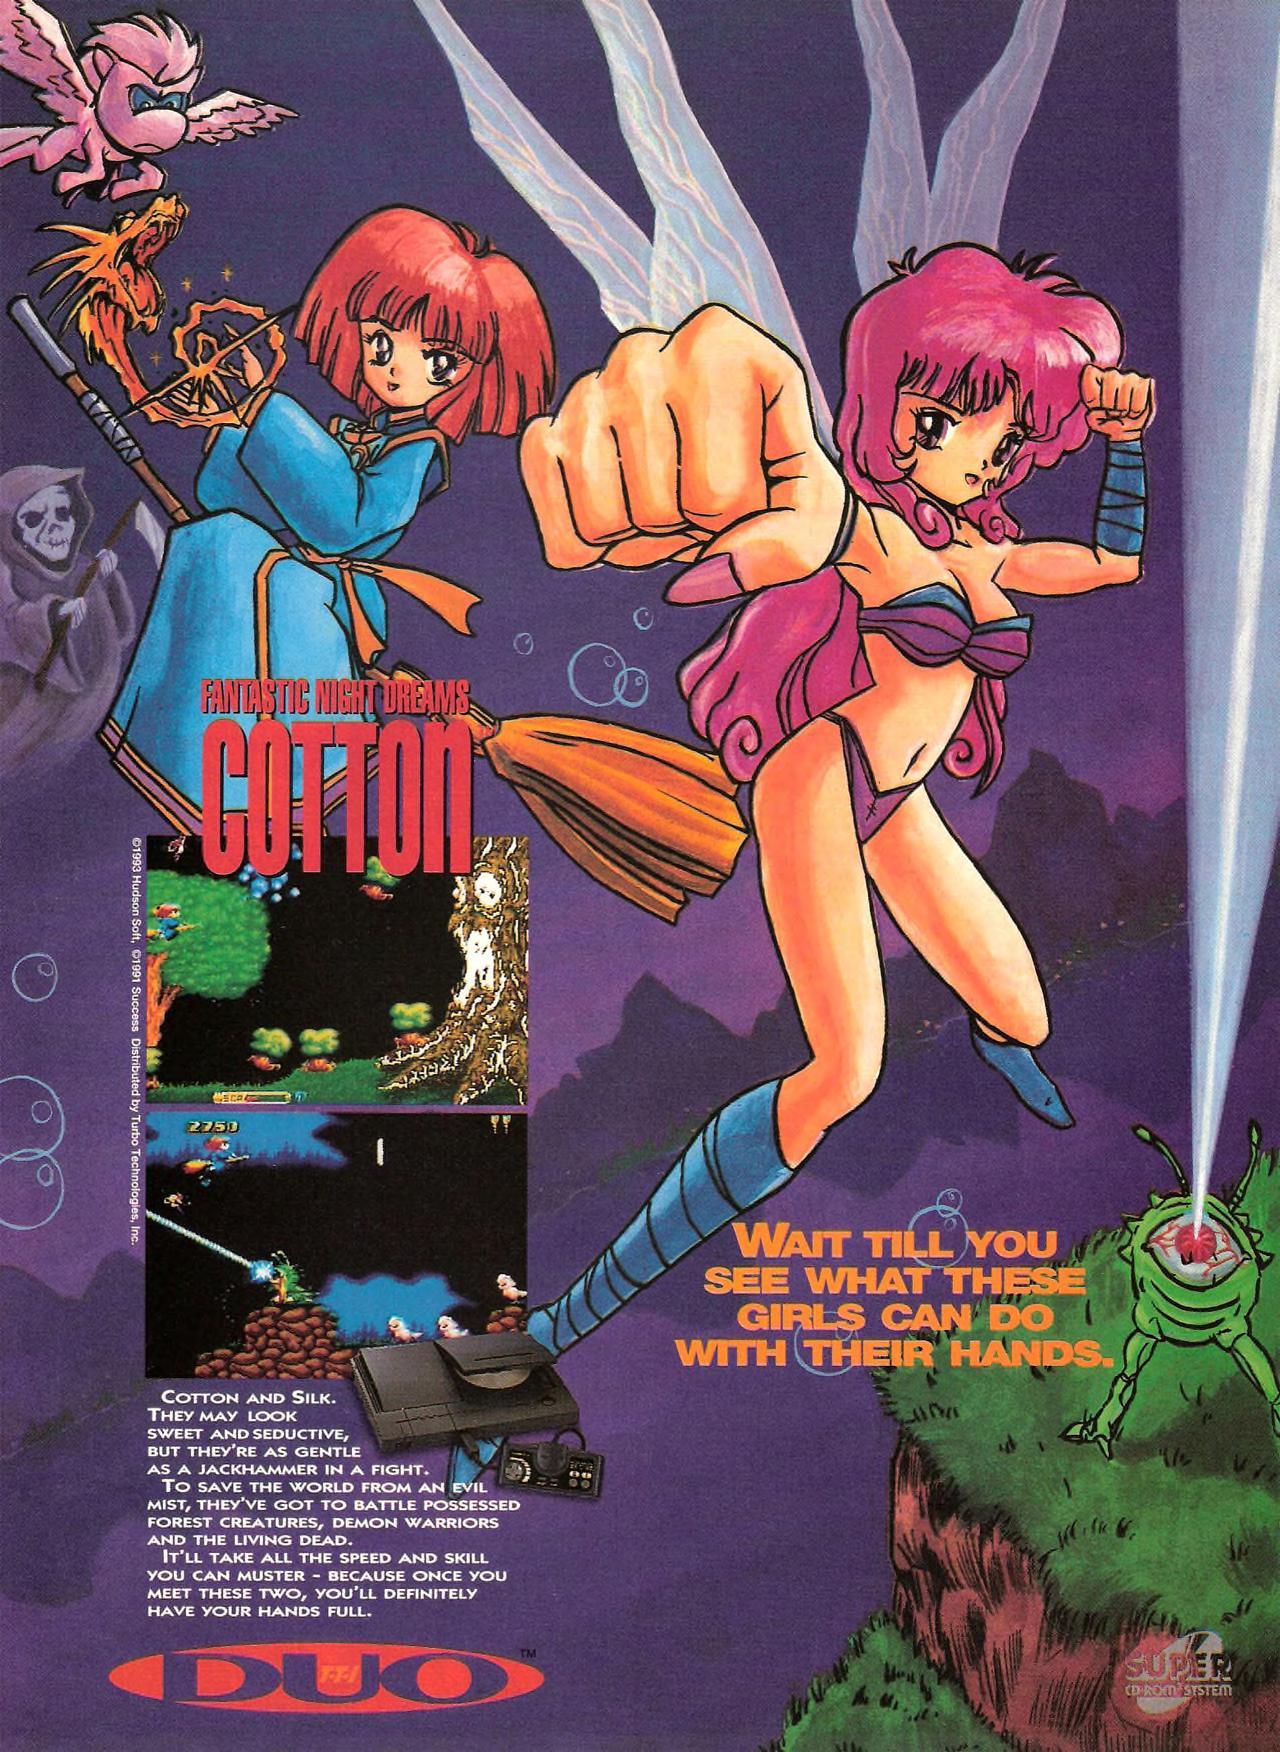 ‘Cotton: Fantastic Night Dreams’[TG-CD] [USA] [MAGAZINE] [1993]
• GamePro, August 1993 (#49)
• Scanned by Phillyman, via RetroMags
““Wait Till You See What These Girls Can Do With Their Hands” ”